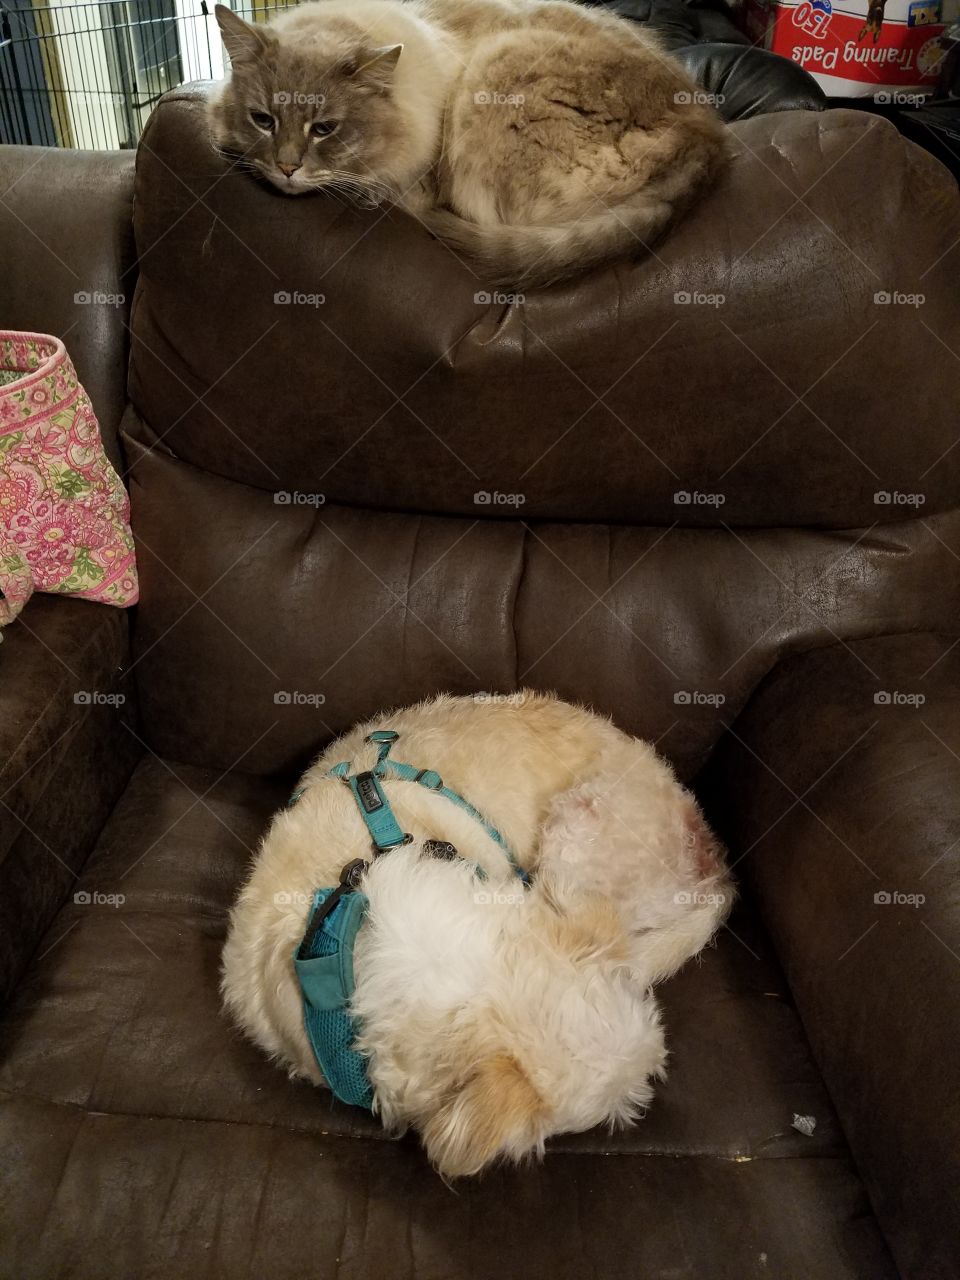 Cat &Dog on couch